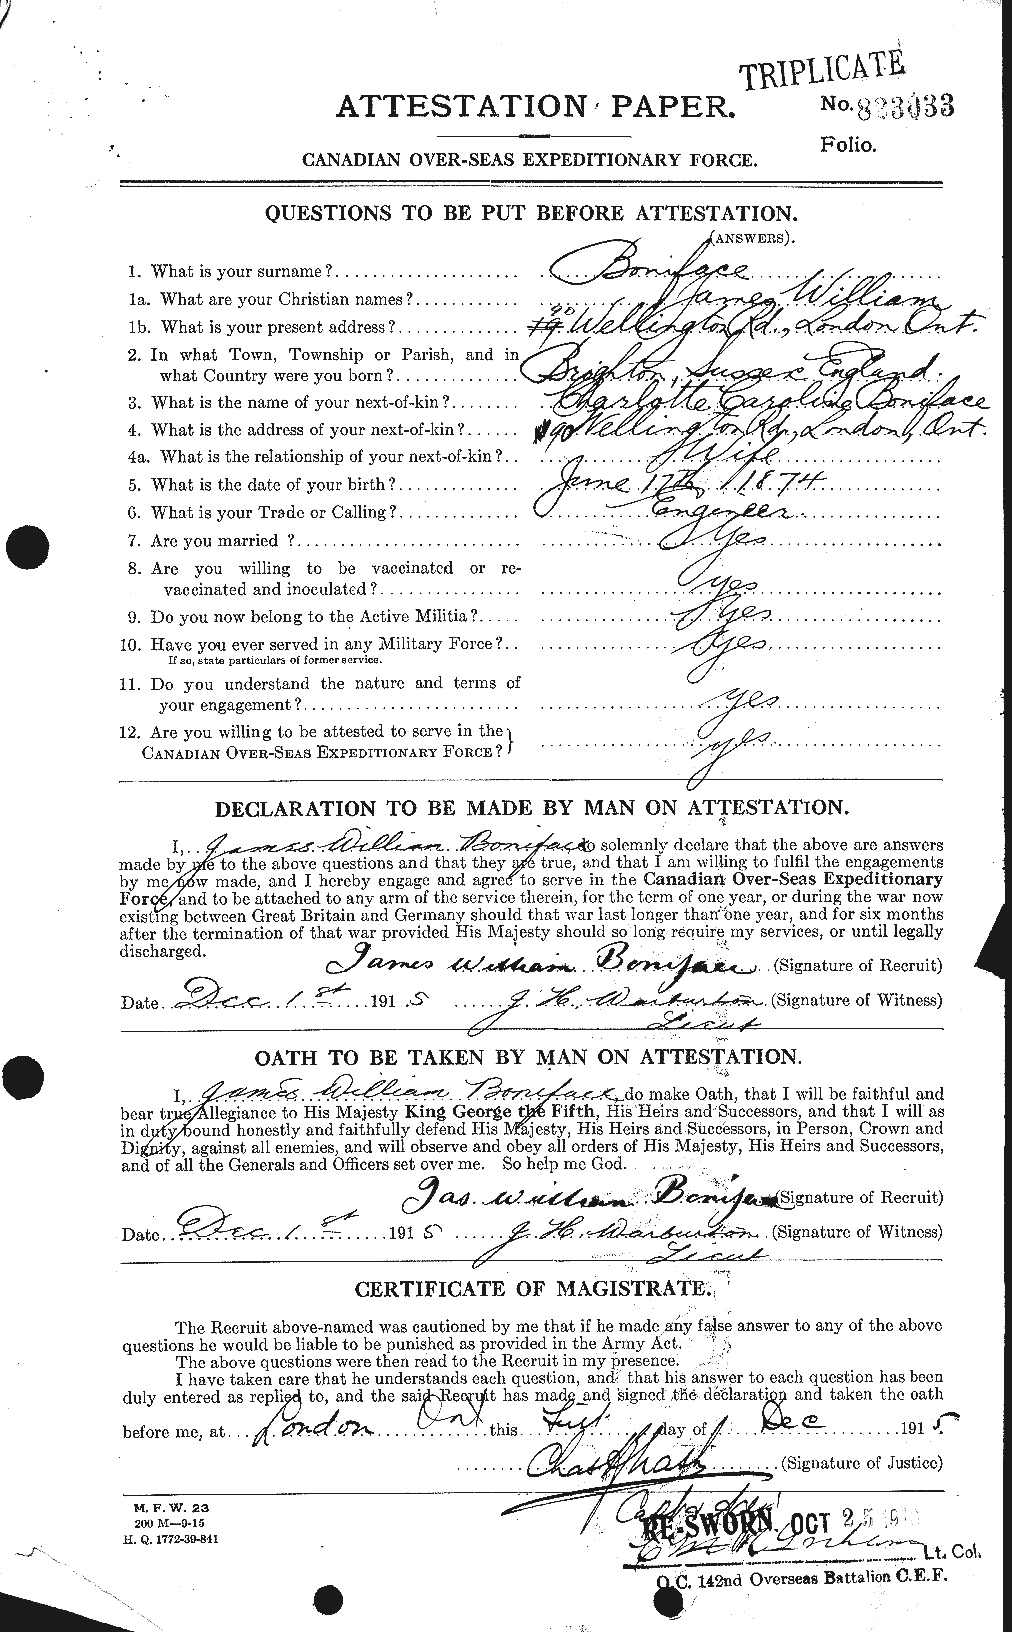 Personnel Records of the First World War - CEF 250653a